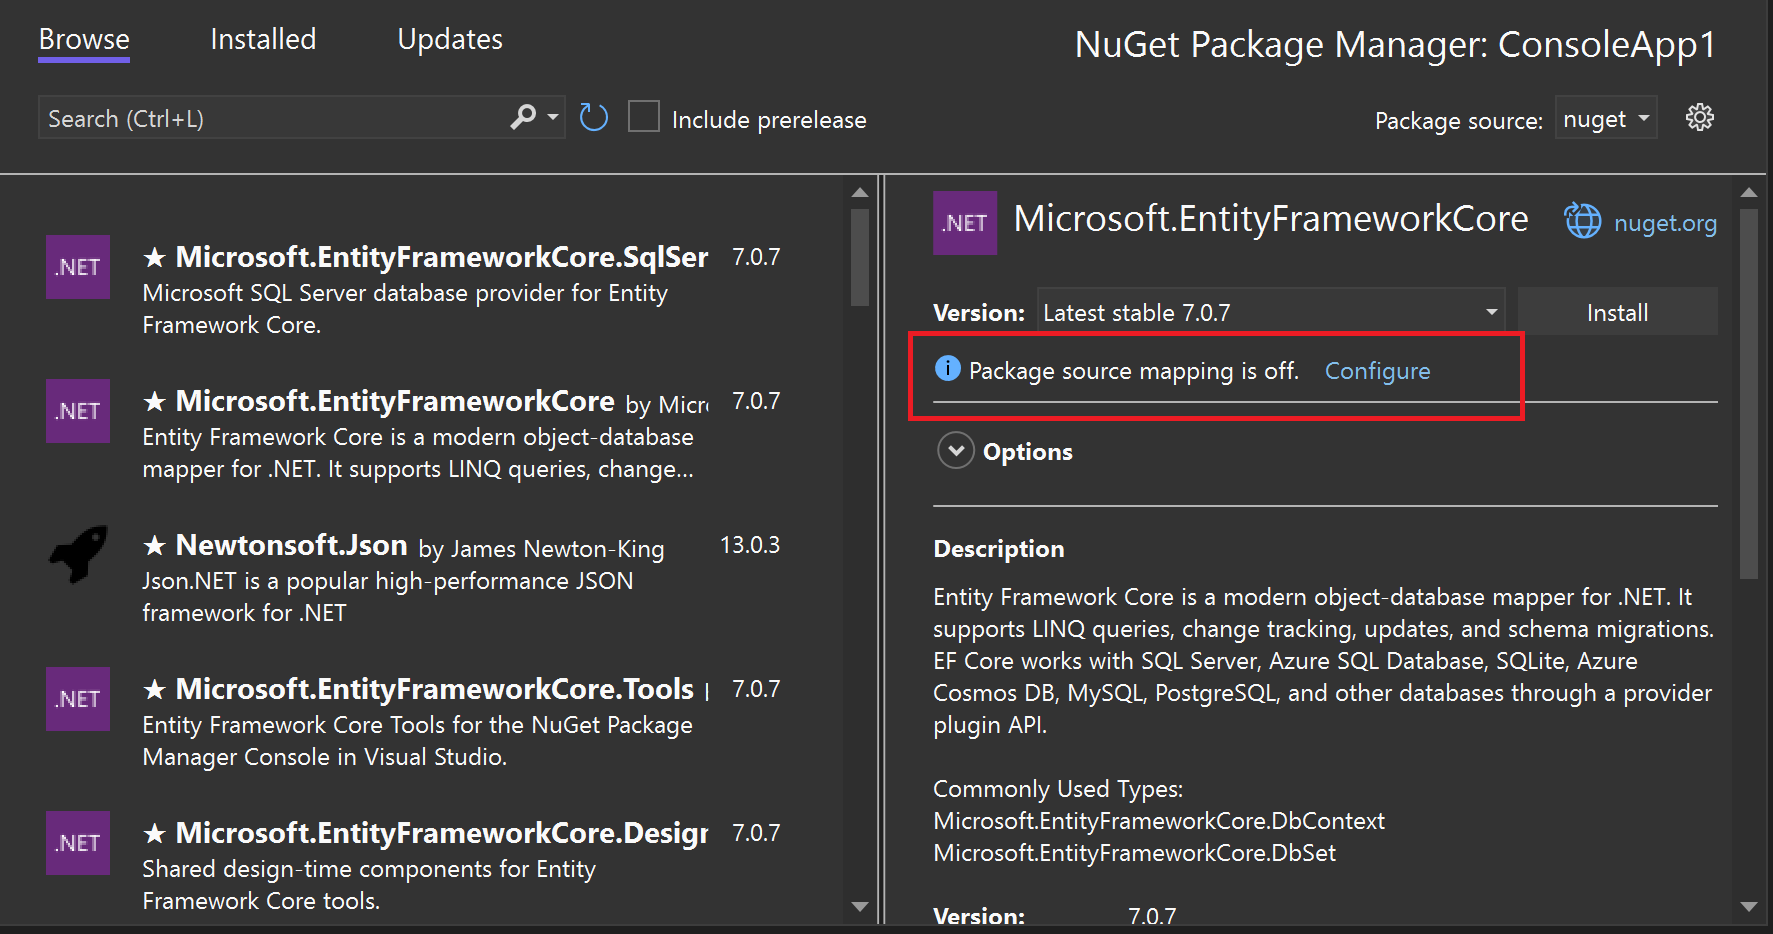 The NuGet Package Manager window in Visual Studio showing a selected package, and a highlight around the 